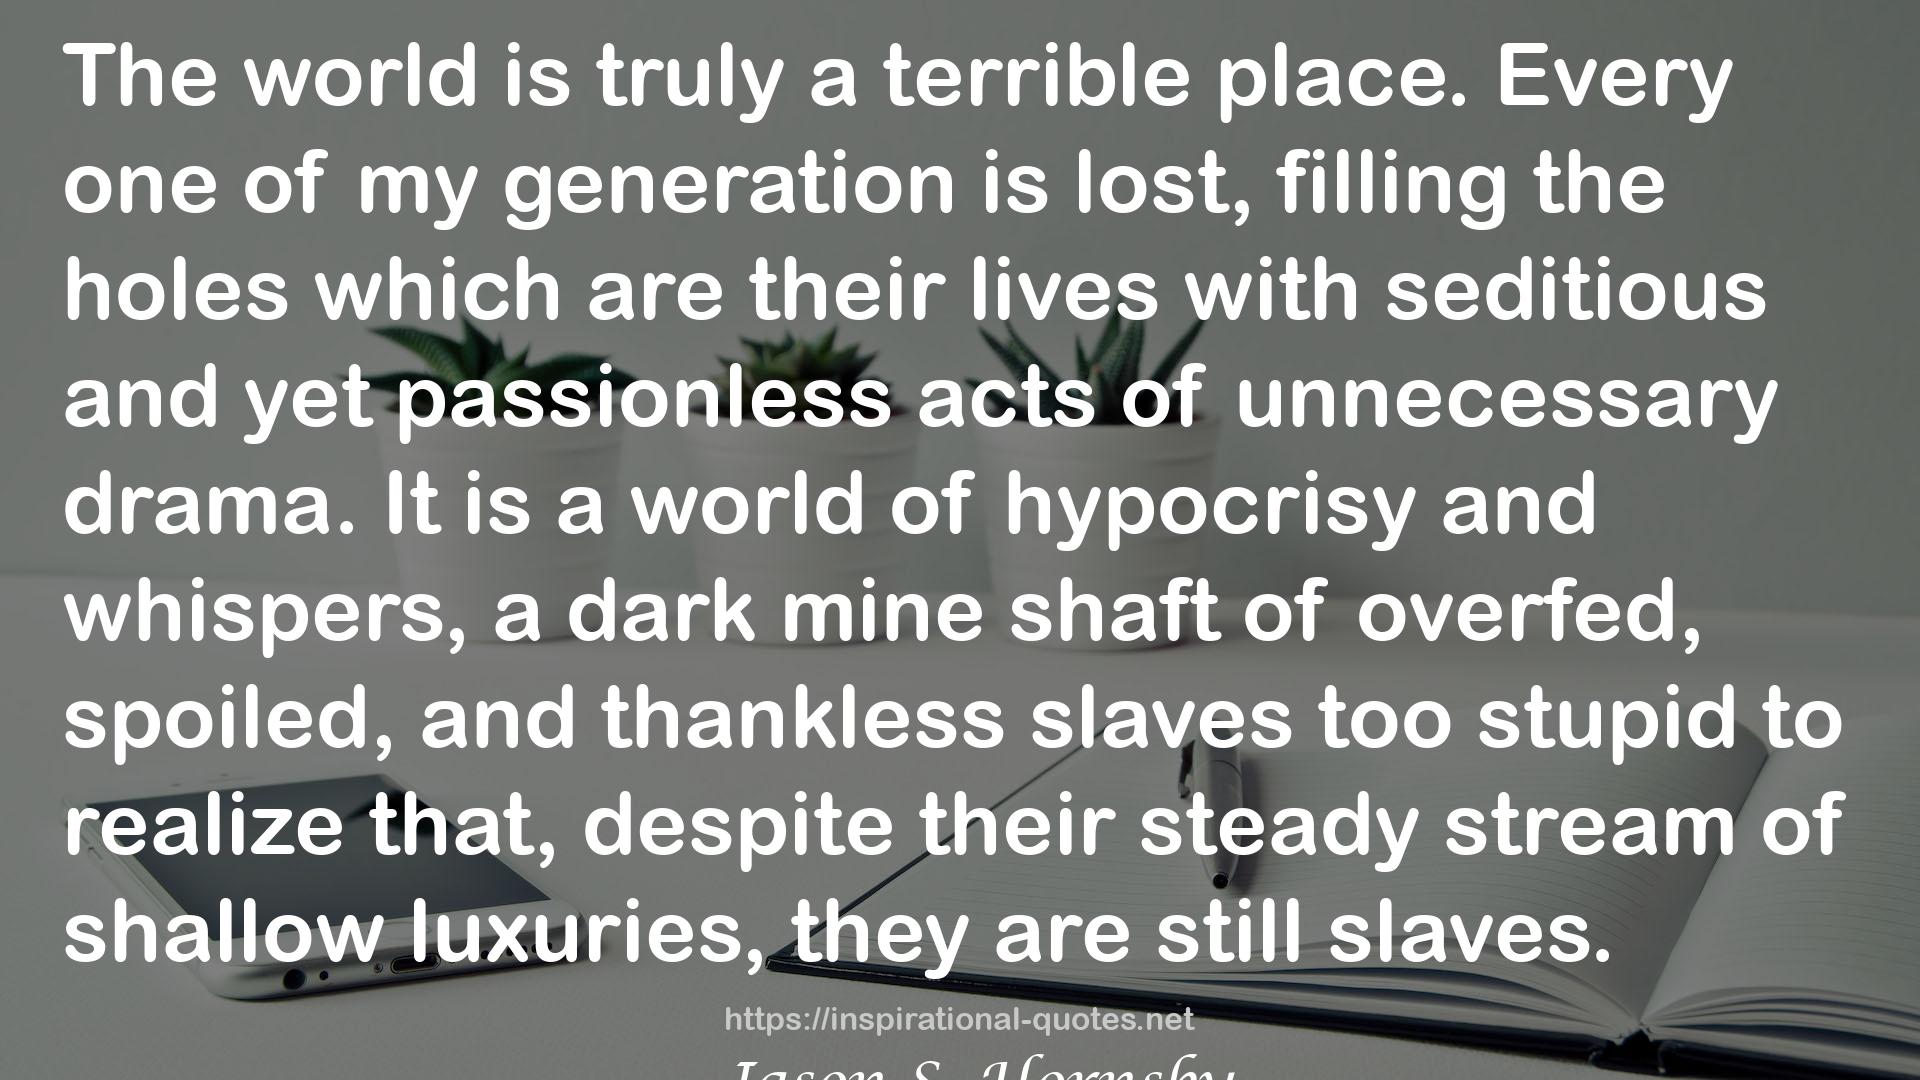 overfed, spoiled, and thankless slaves  QUOTES